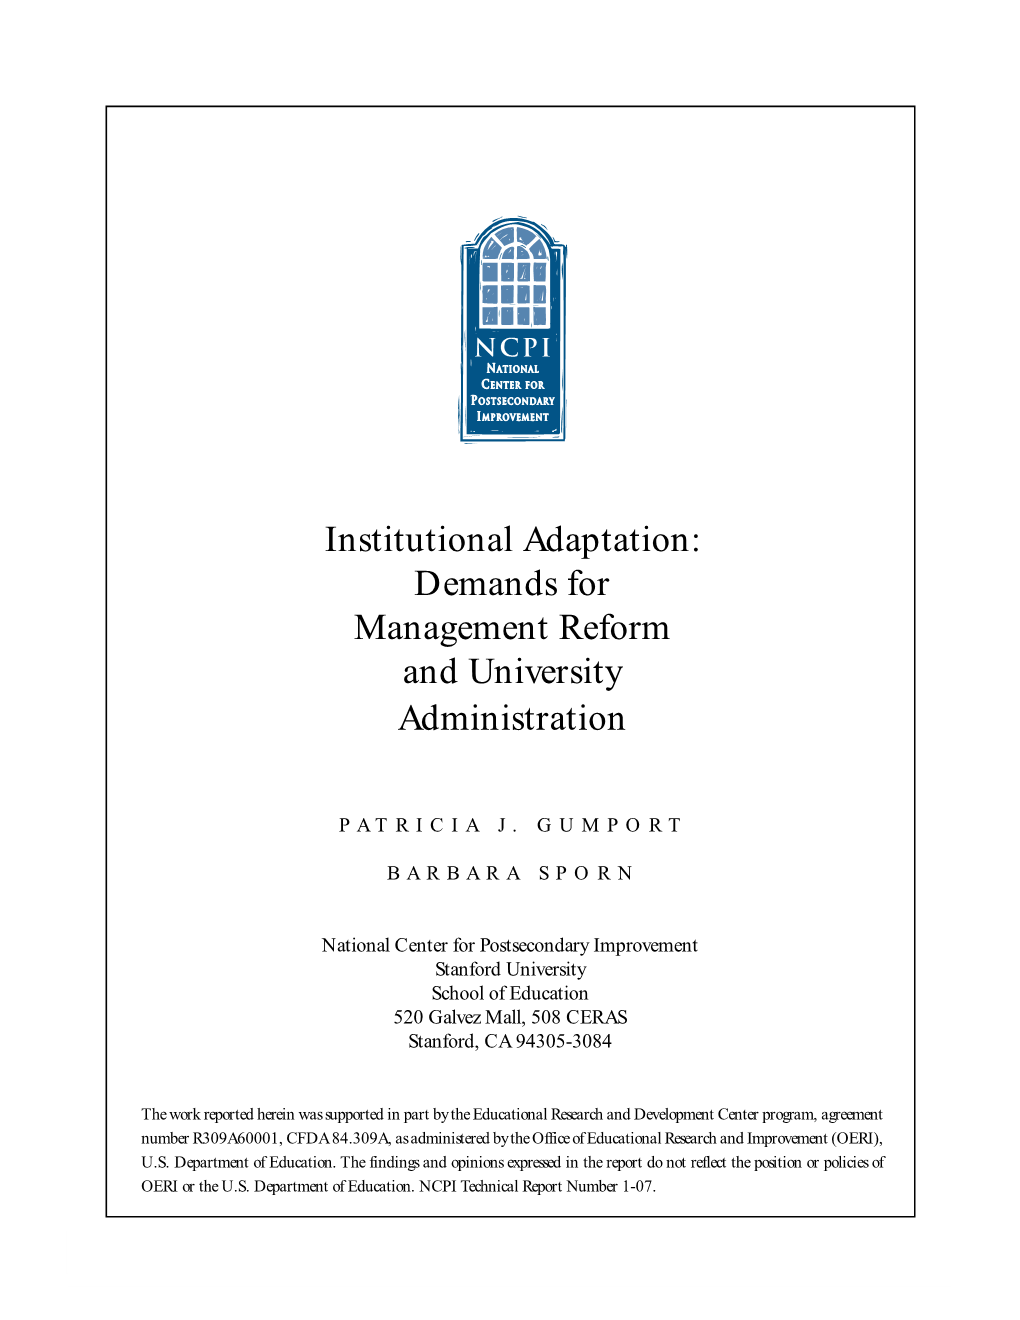 Institutional Adaptation: Demands for Management Reform and University Administration